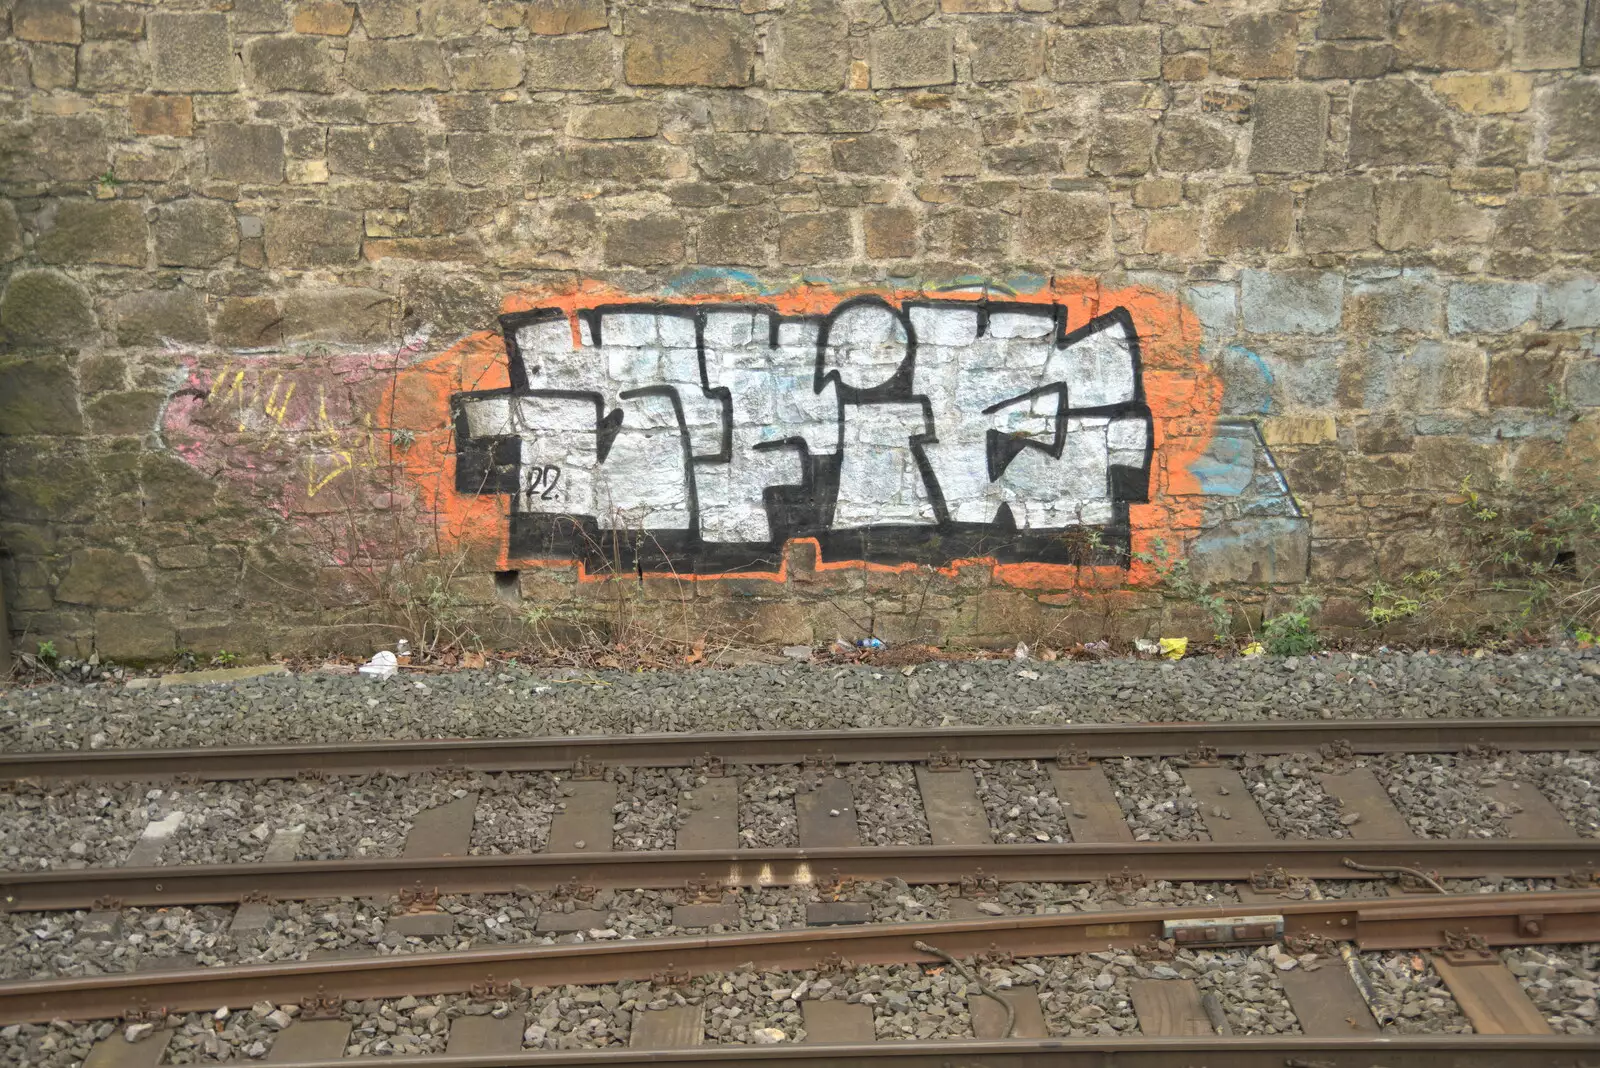 A funky graffiti tag on the DART wall, from The End of the Breffni, Blackrock, Dublin - 18th February 2023